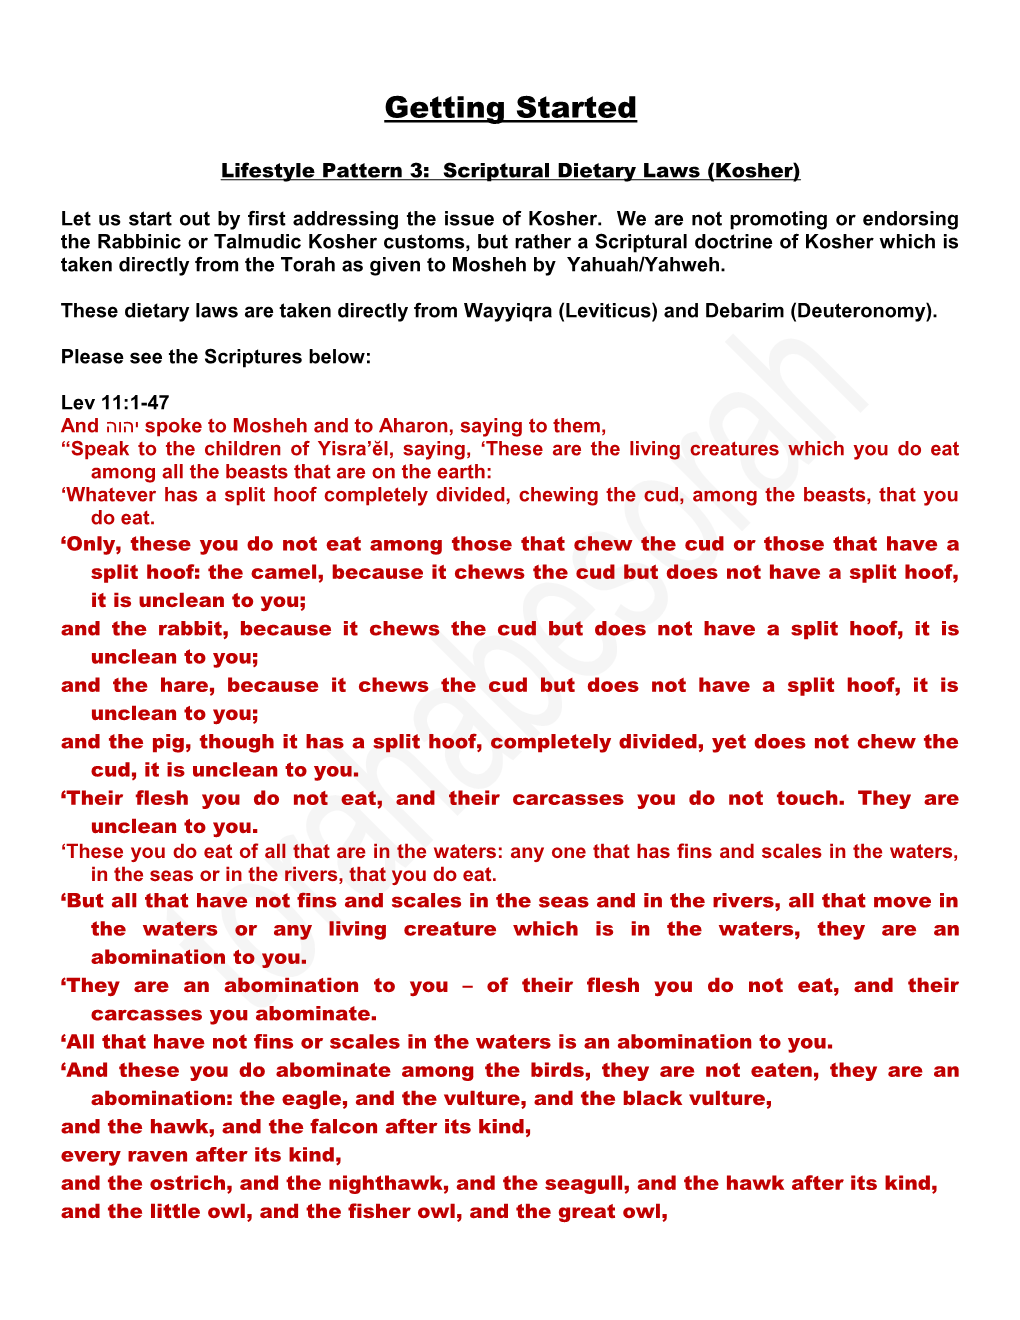 Lifestyle Pattern 3: Scriptural Dietary Laws (Kosher)